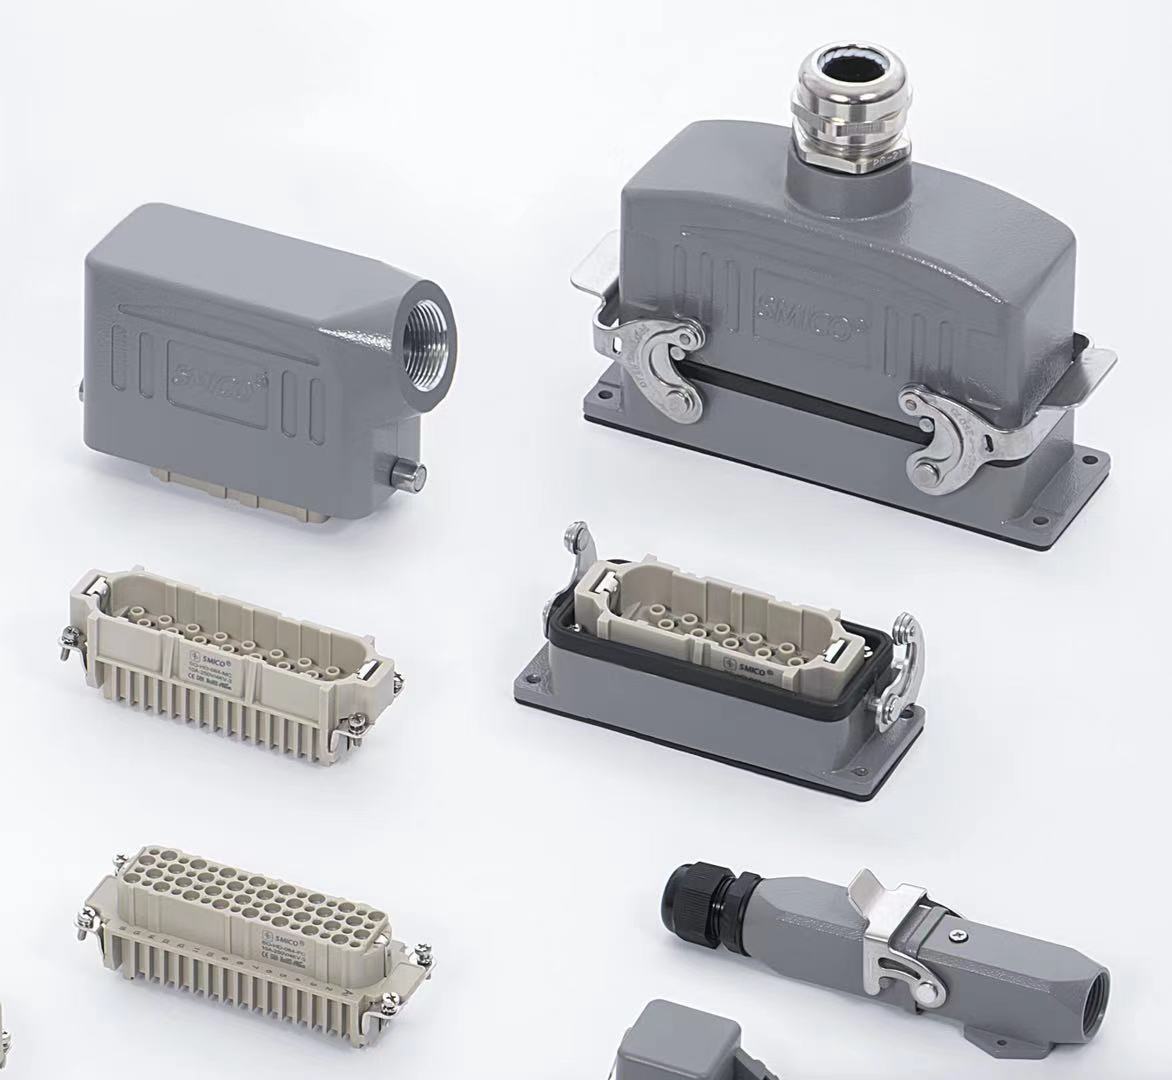 Re-understand the significance and importance of heavy-duty connectors